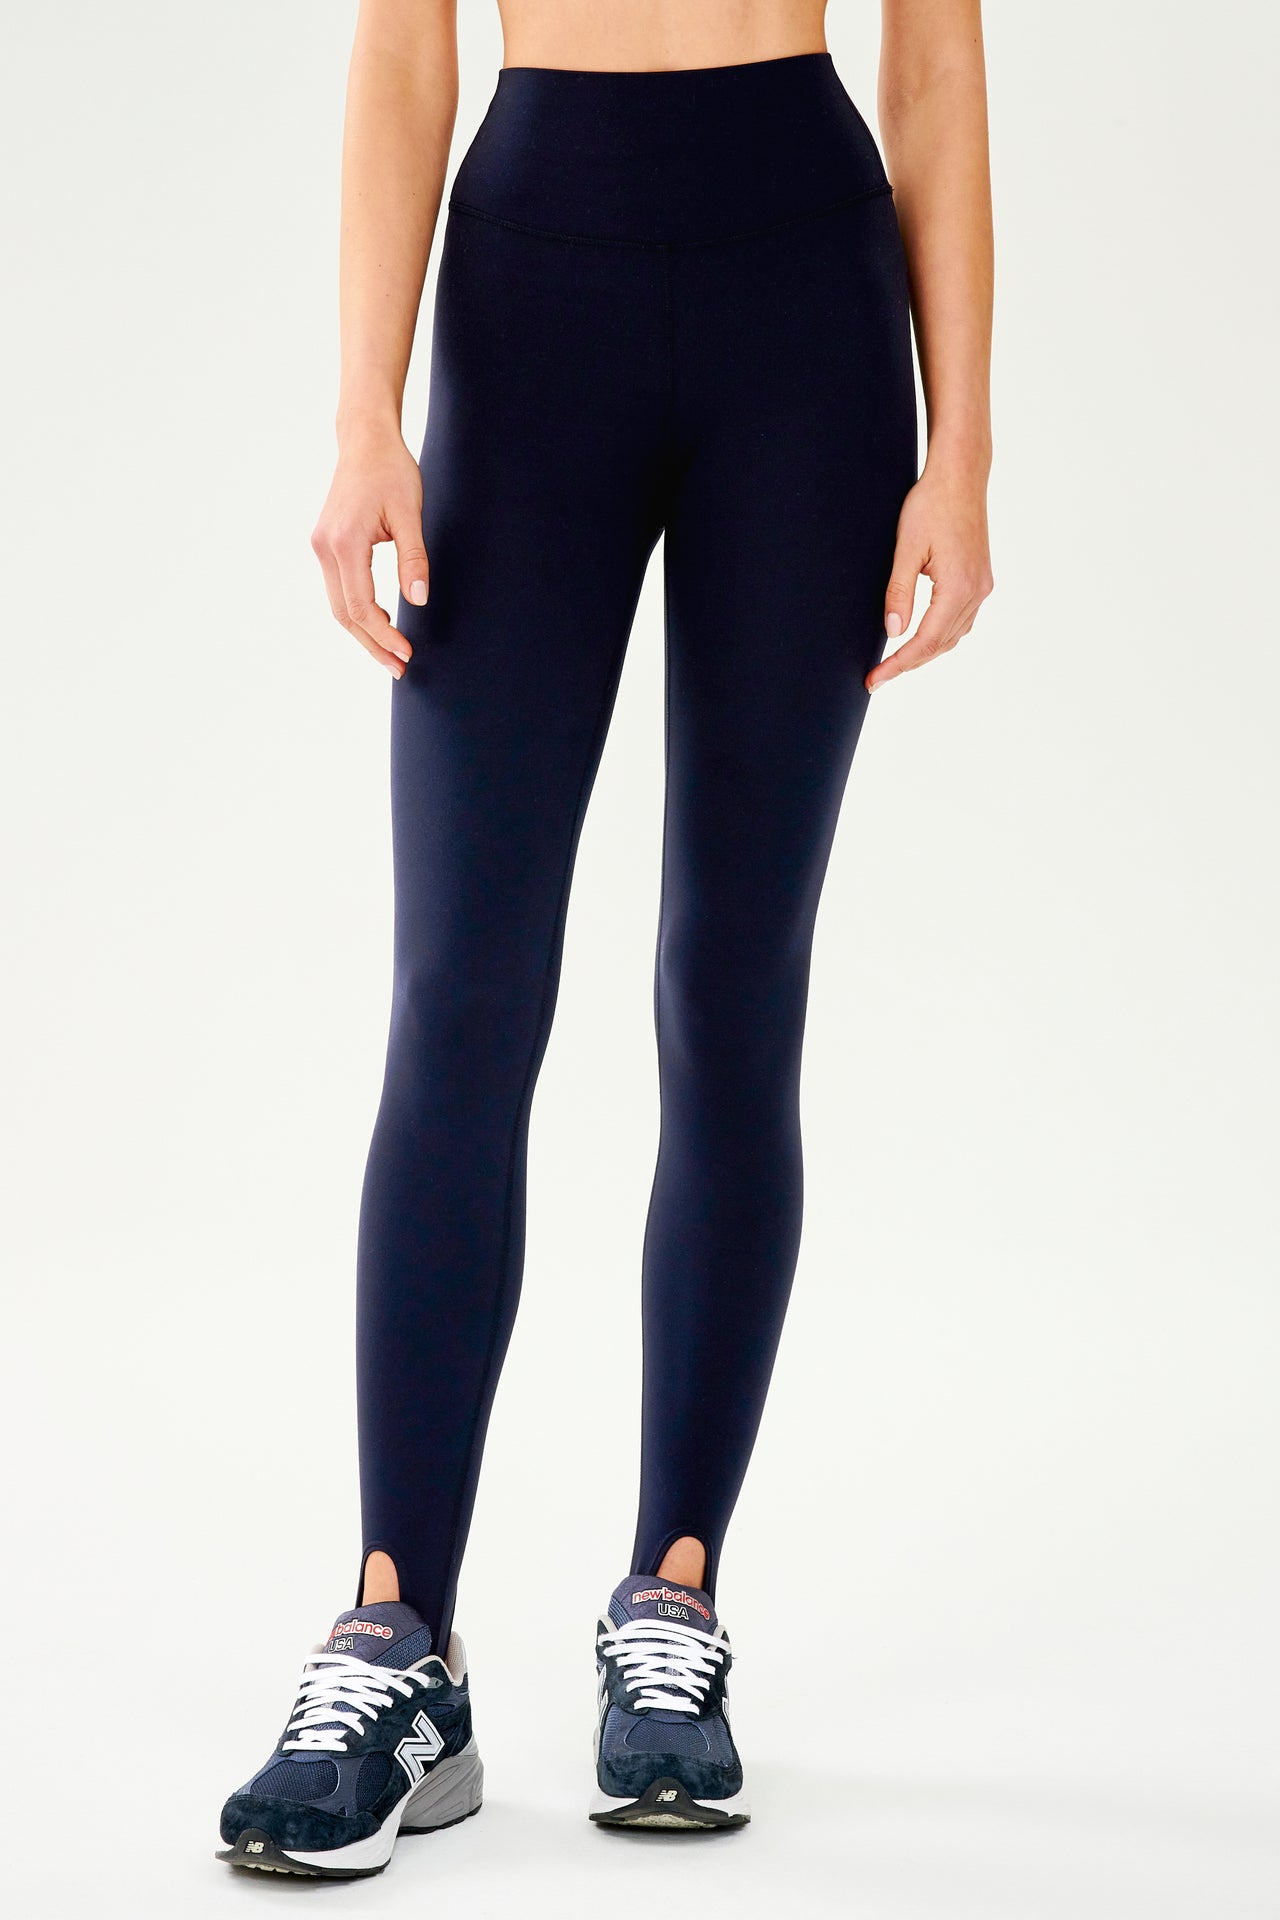 Front view of dark blue leggings with bottom strap that wraps around the foot paired with dark blue and white shoes